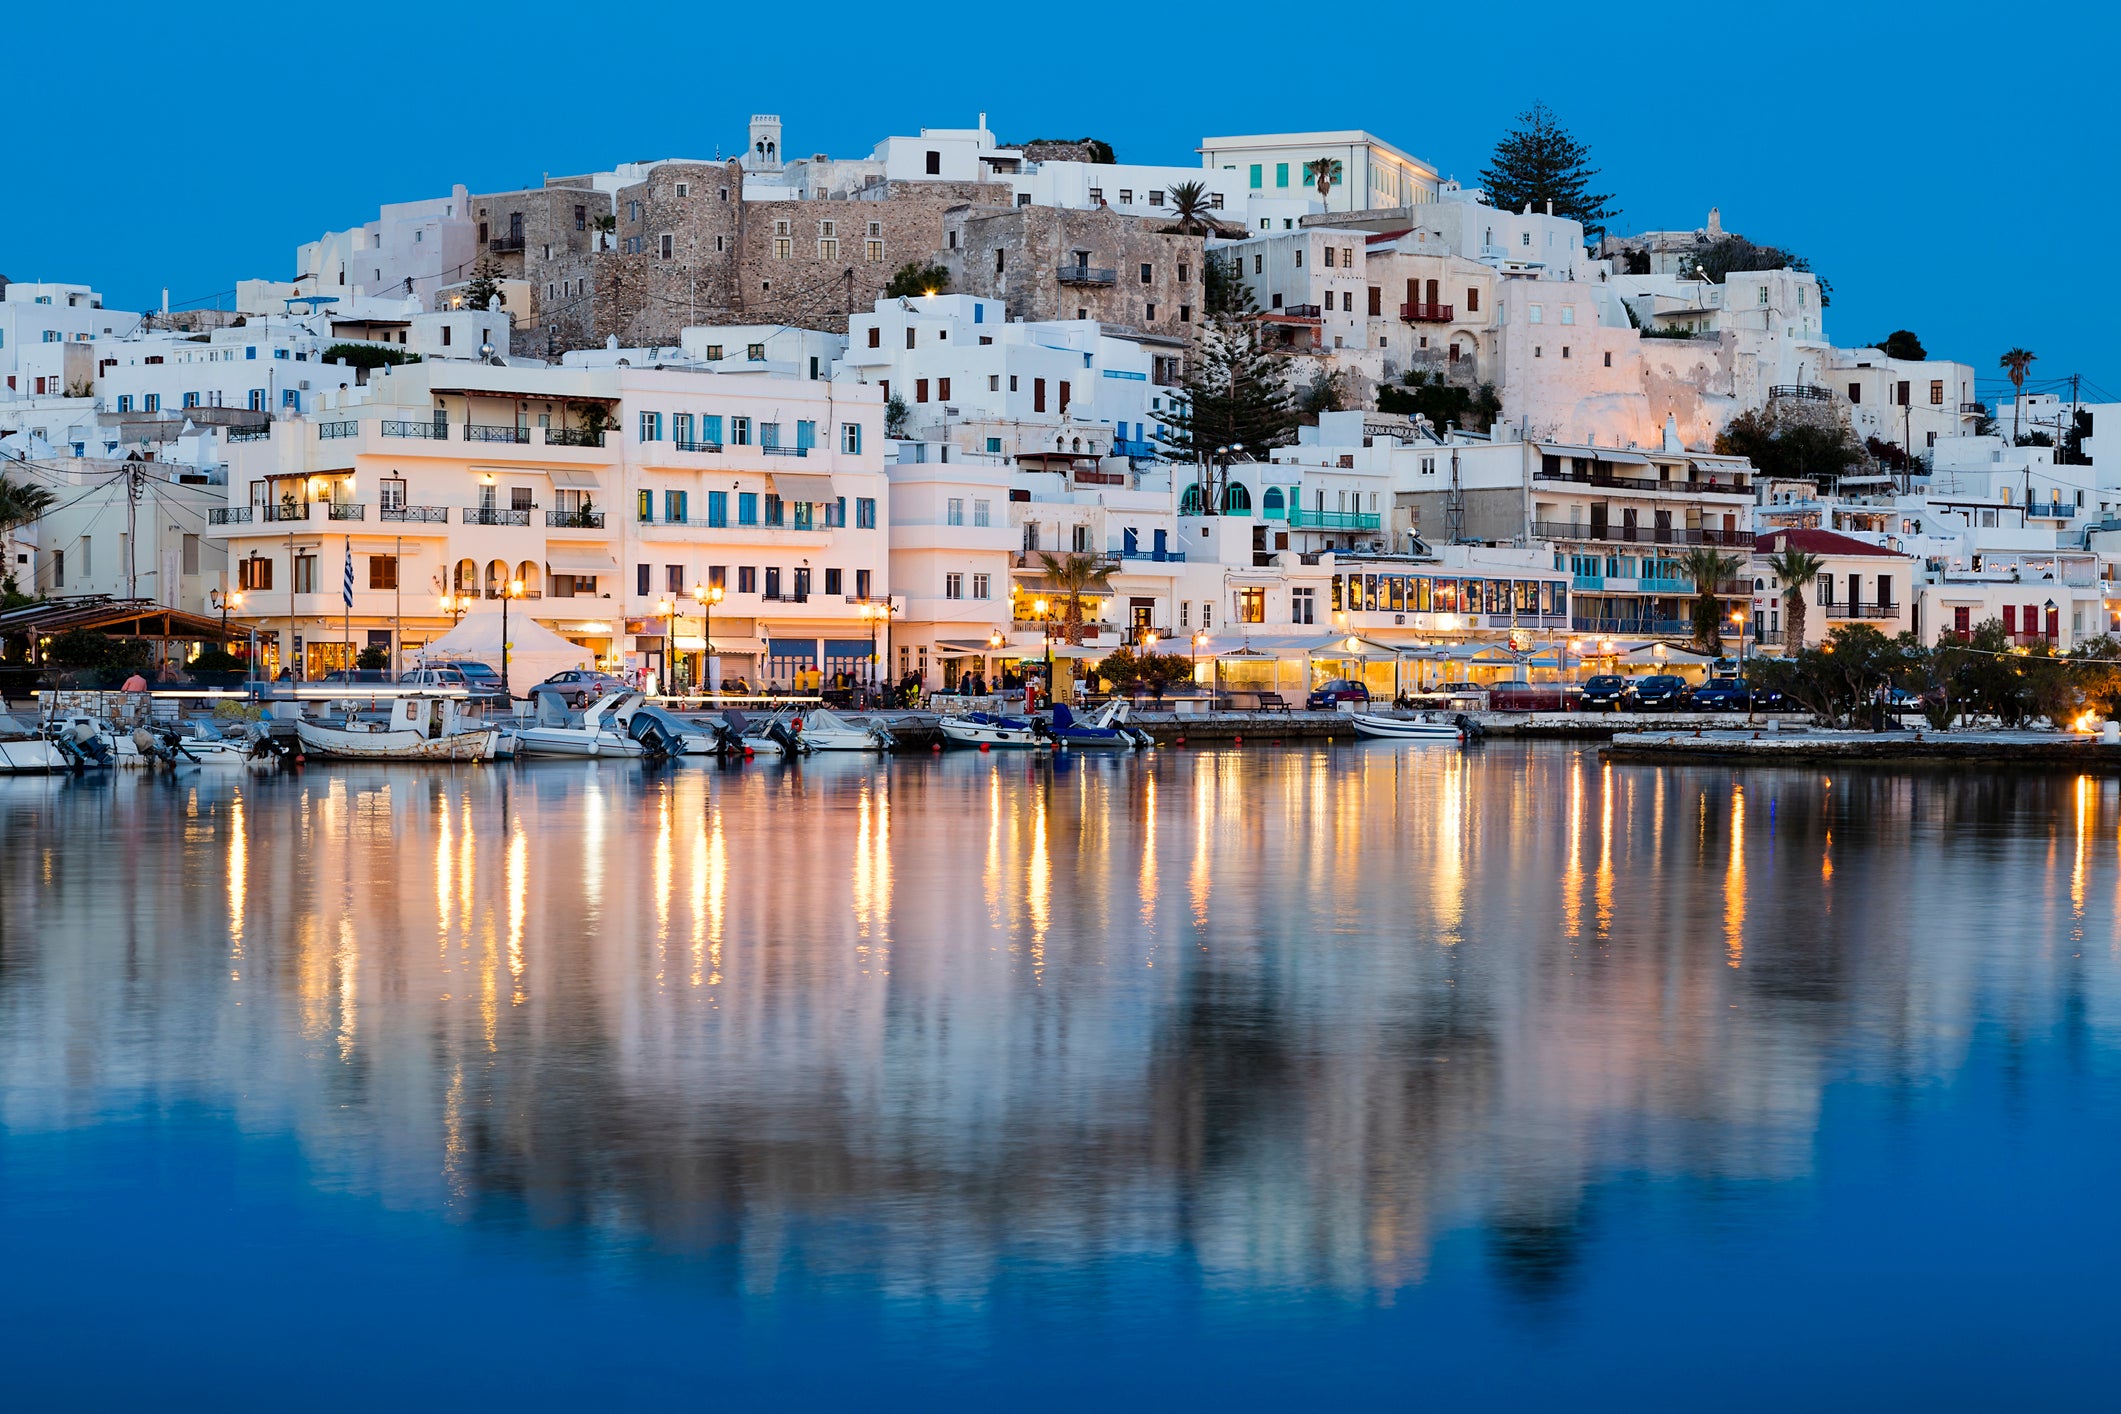 Naxos Town is full of traditional Greek architecture and postcard-perfect views